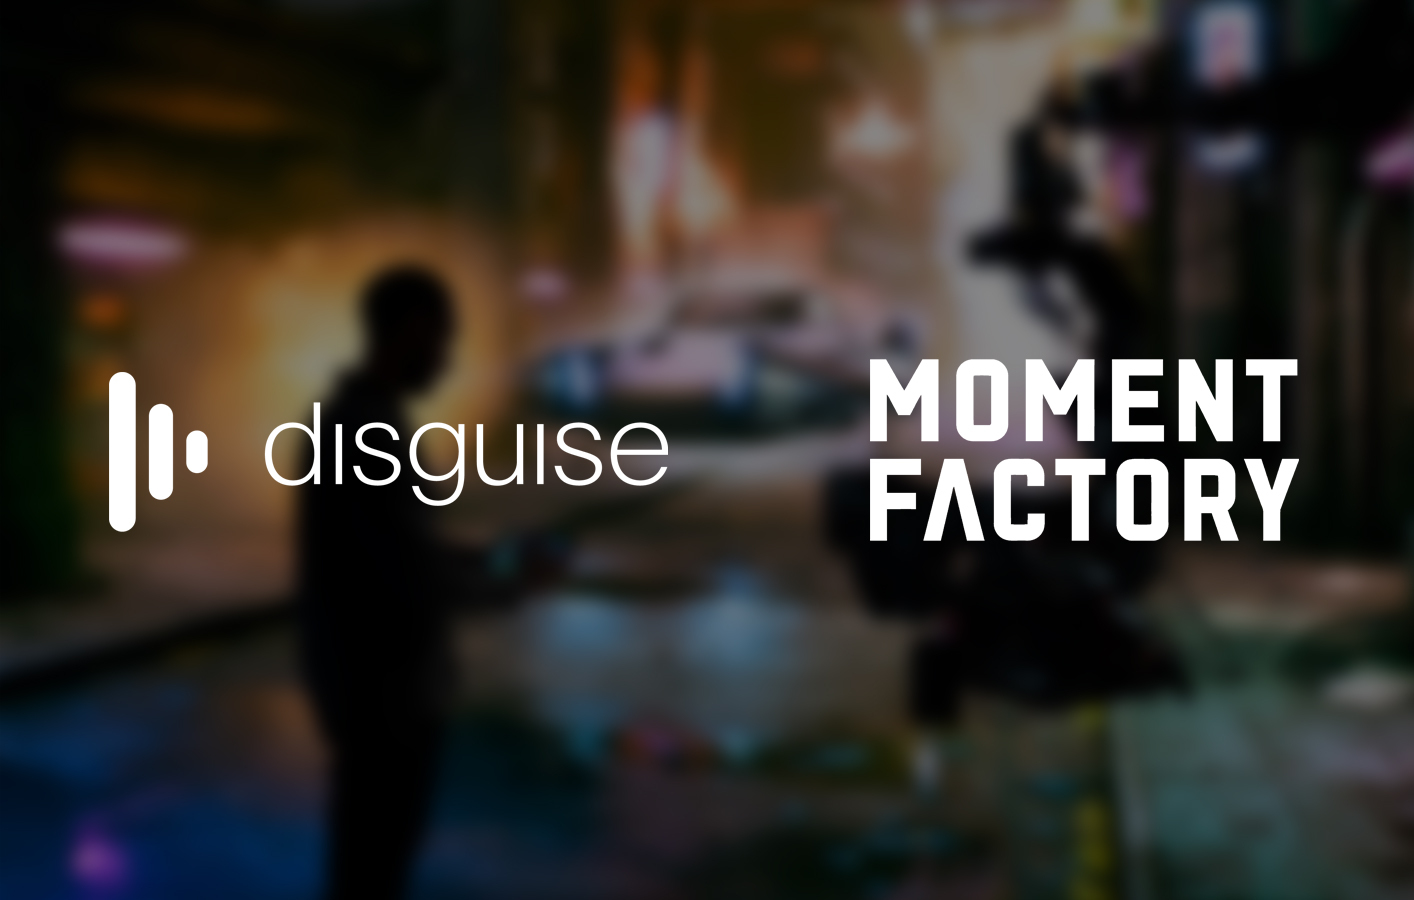 disguise and Moment Factory launch collaboration to drive innovative storytelling in live and broadcast events